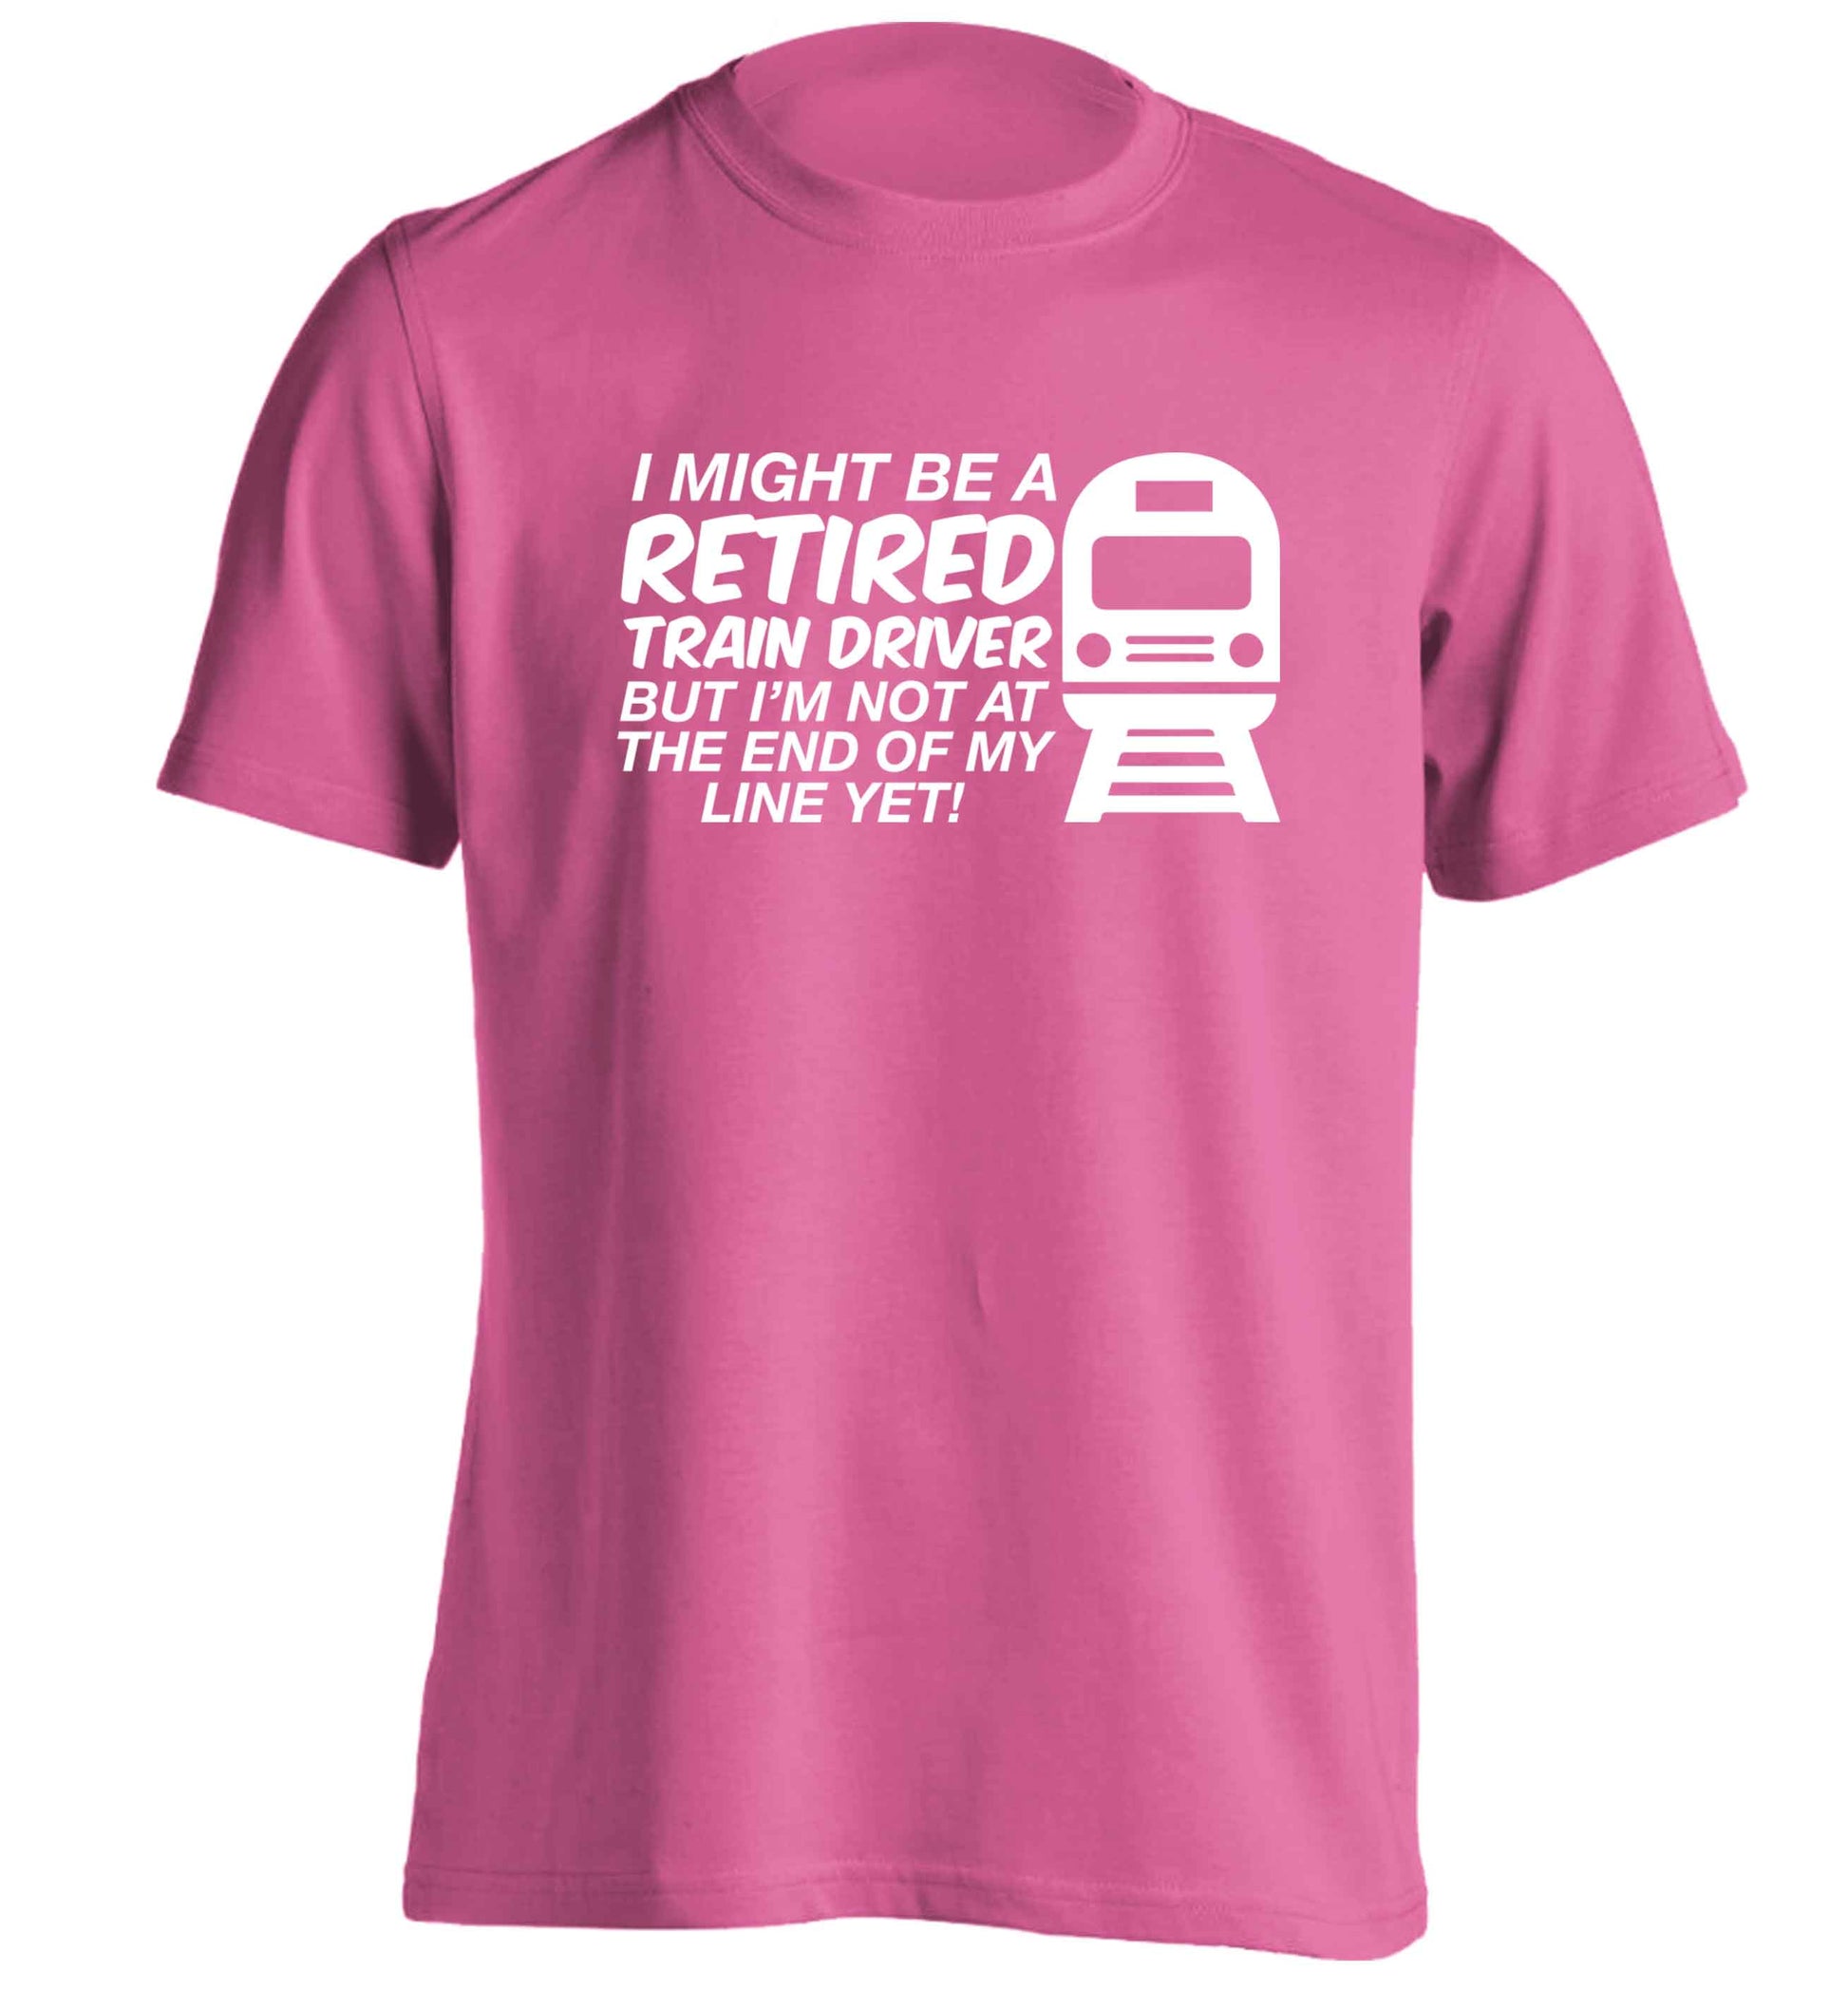 Retired train driver but I'm not at the end of my line yet adults unisex pink Tshirt 2XL